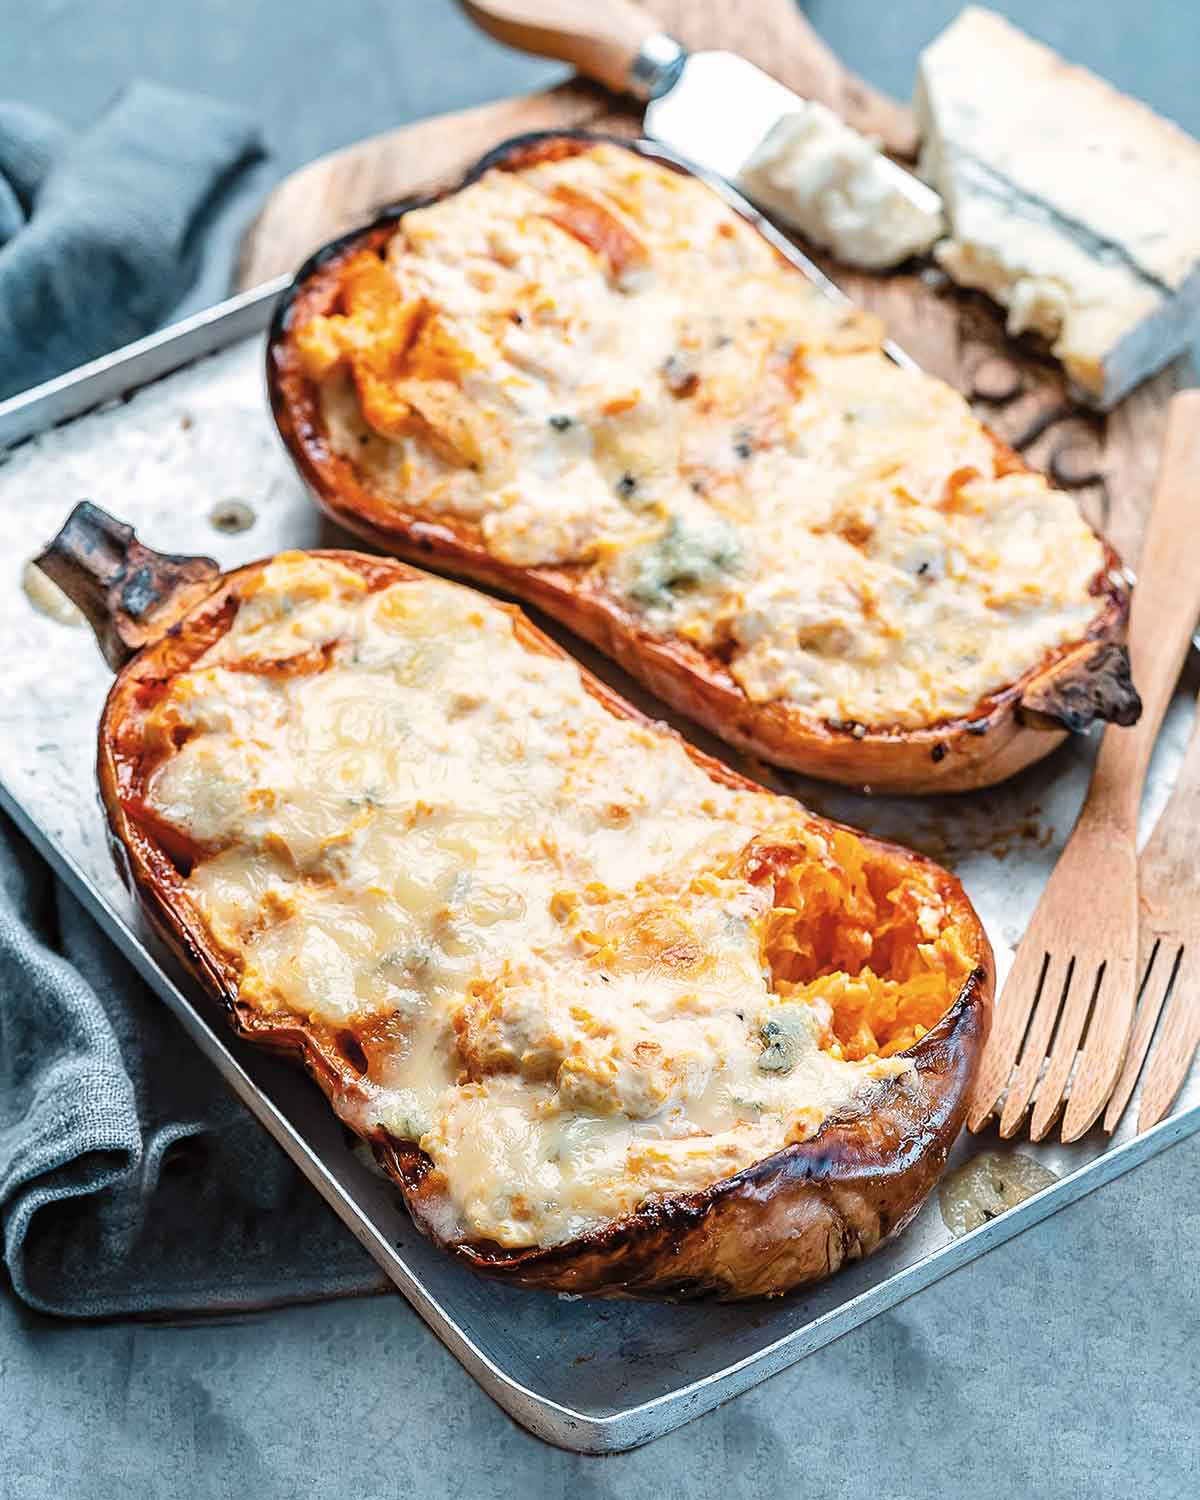 A stuffed roast winter squash with blue cheese on a rimmed baking sheet.